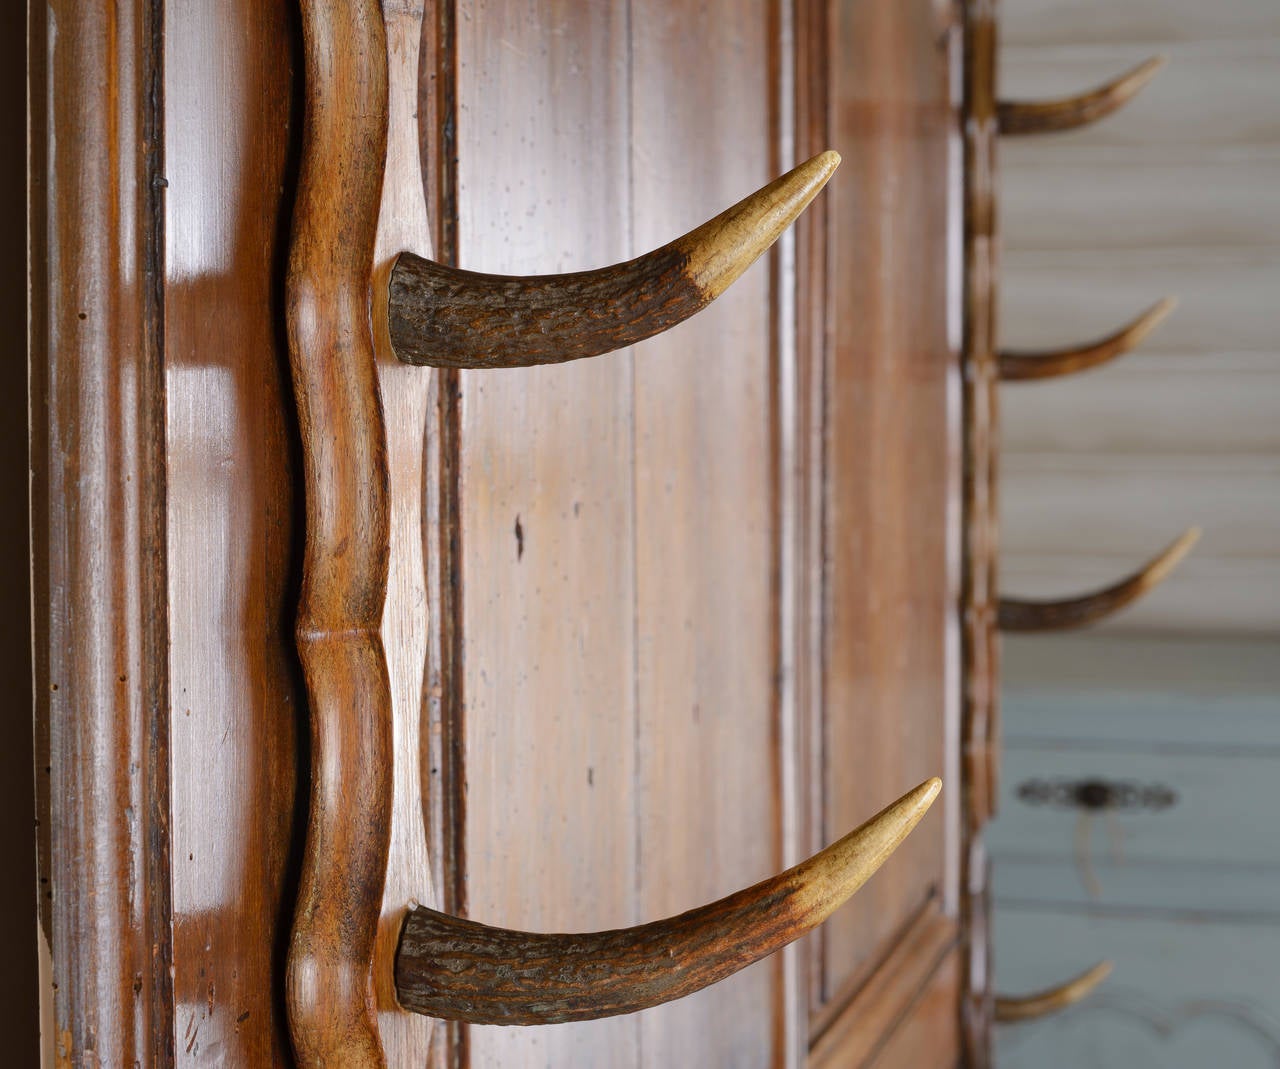 Louis XV doors have been made up to be a gun rack with stag horn brackets and shelf.  The wood is cherry and has a wonderful patina.
It alternatively could be used as a coat rack.